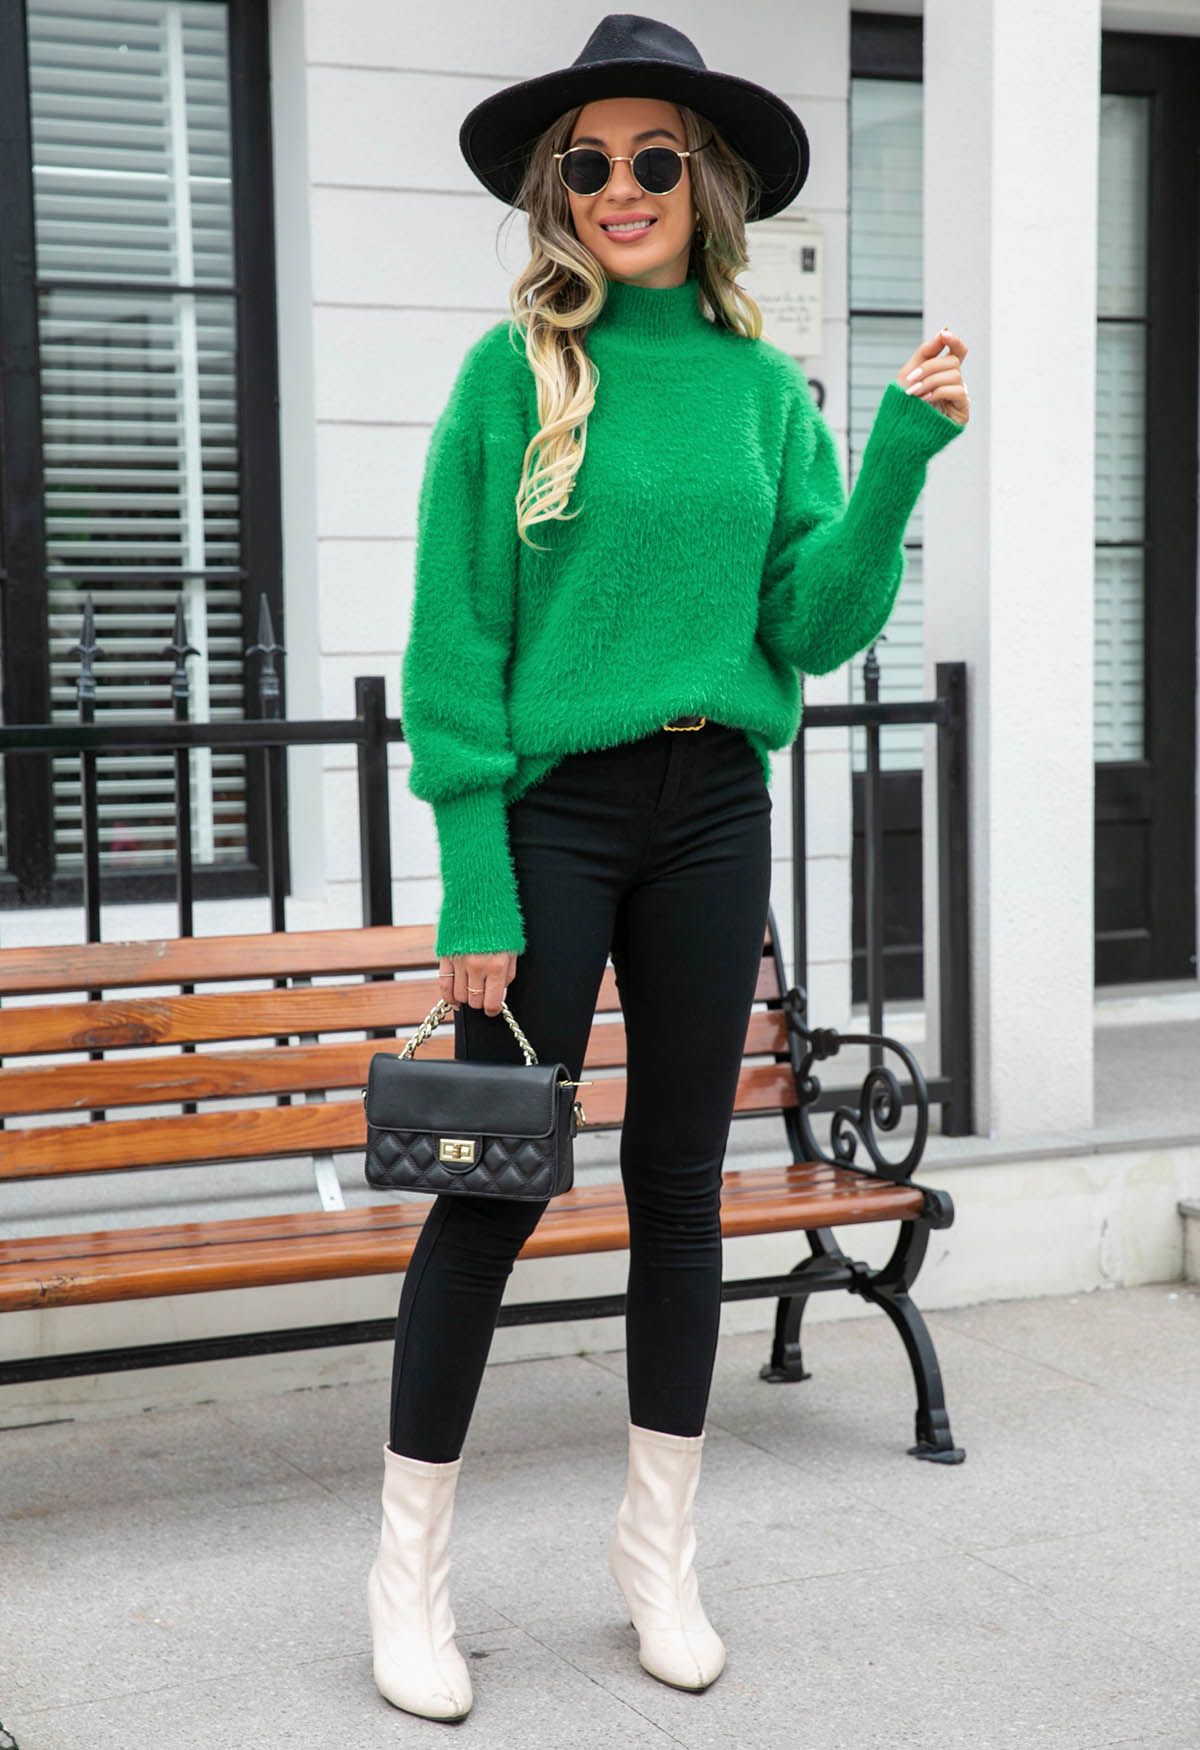 Cozy Perfection High Neck Fuzzy Knit Sweater in Green - Retro, Indie ...